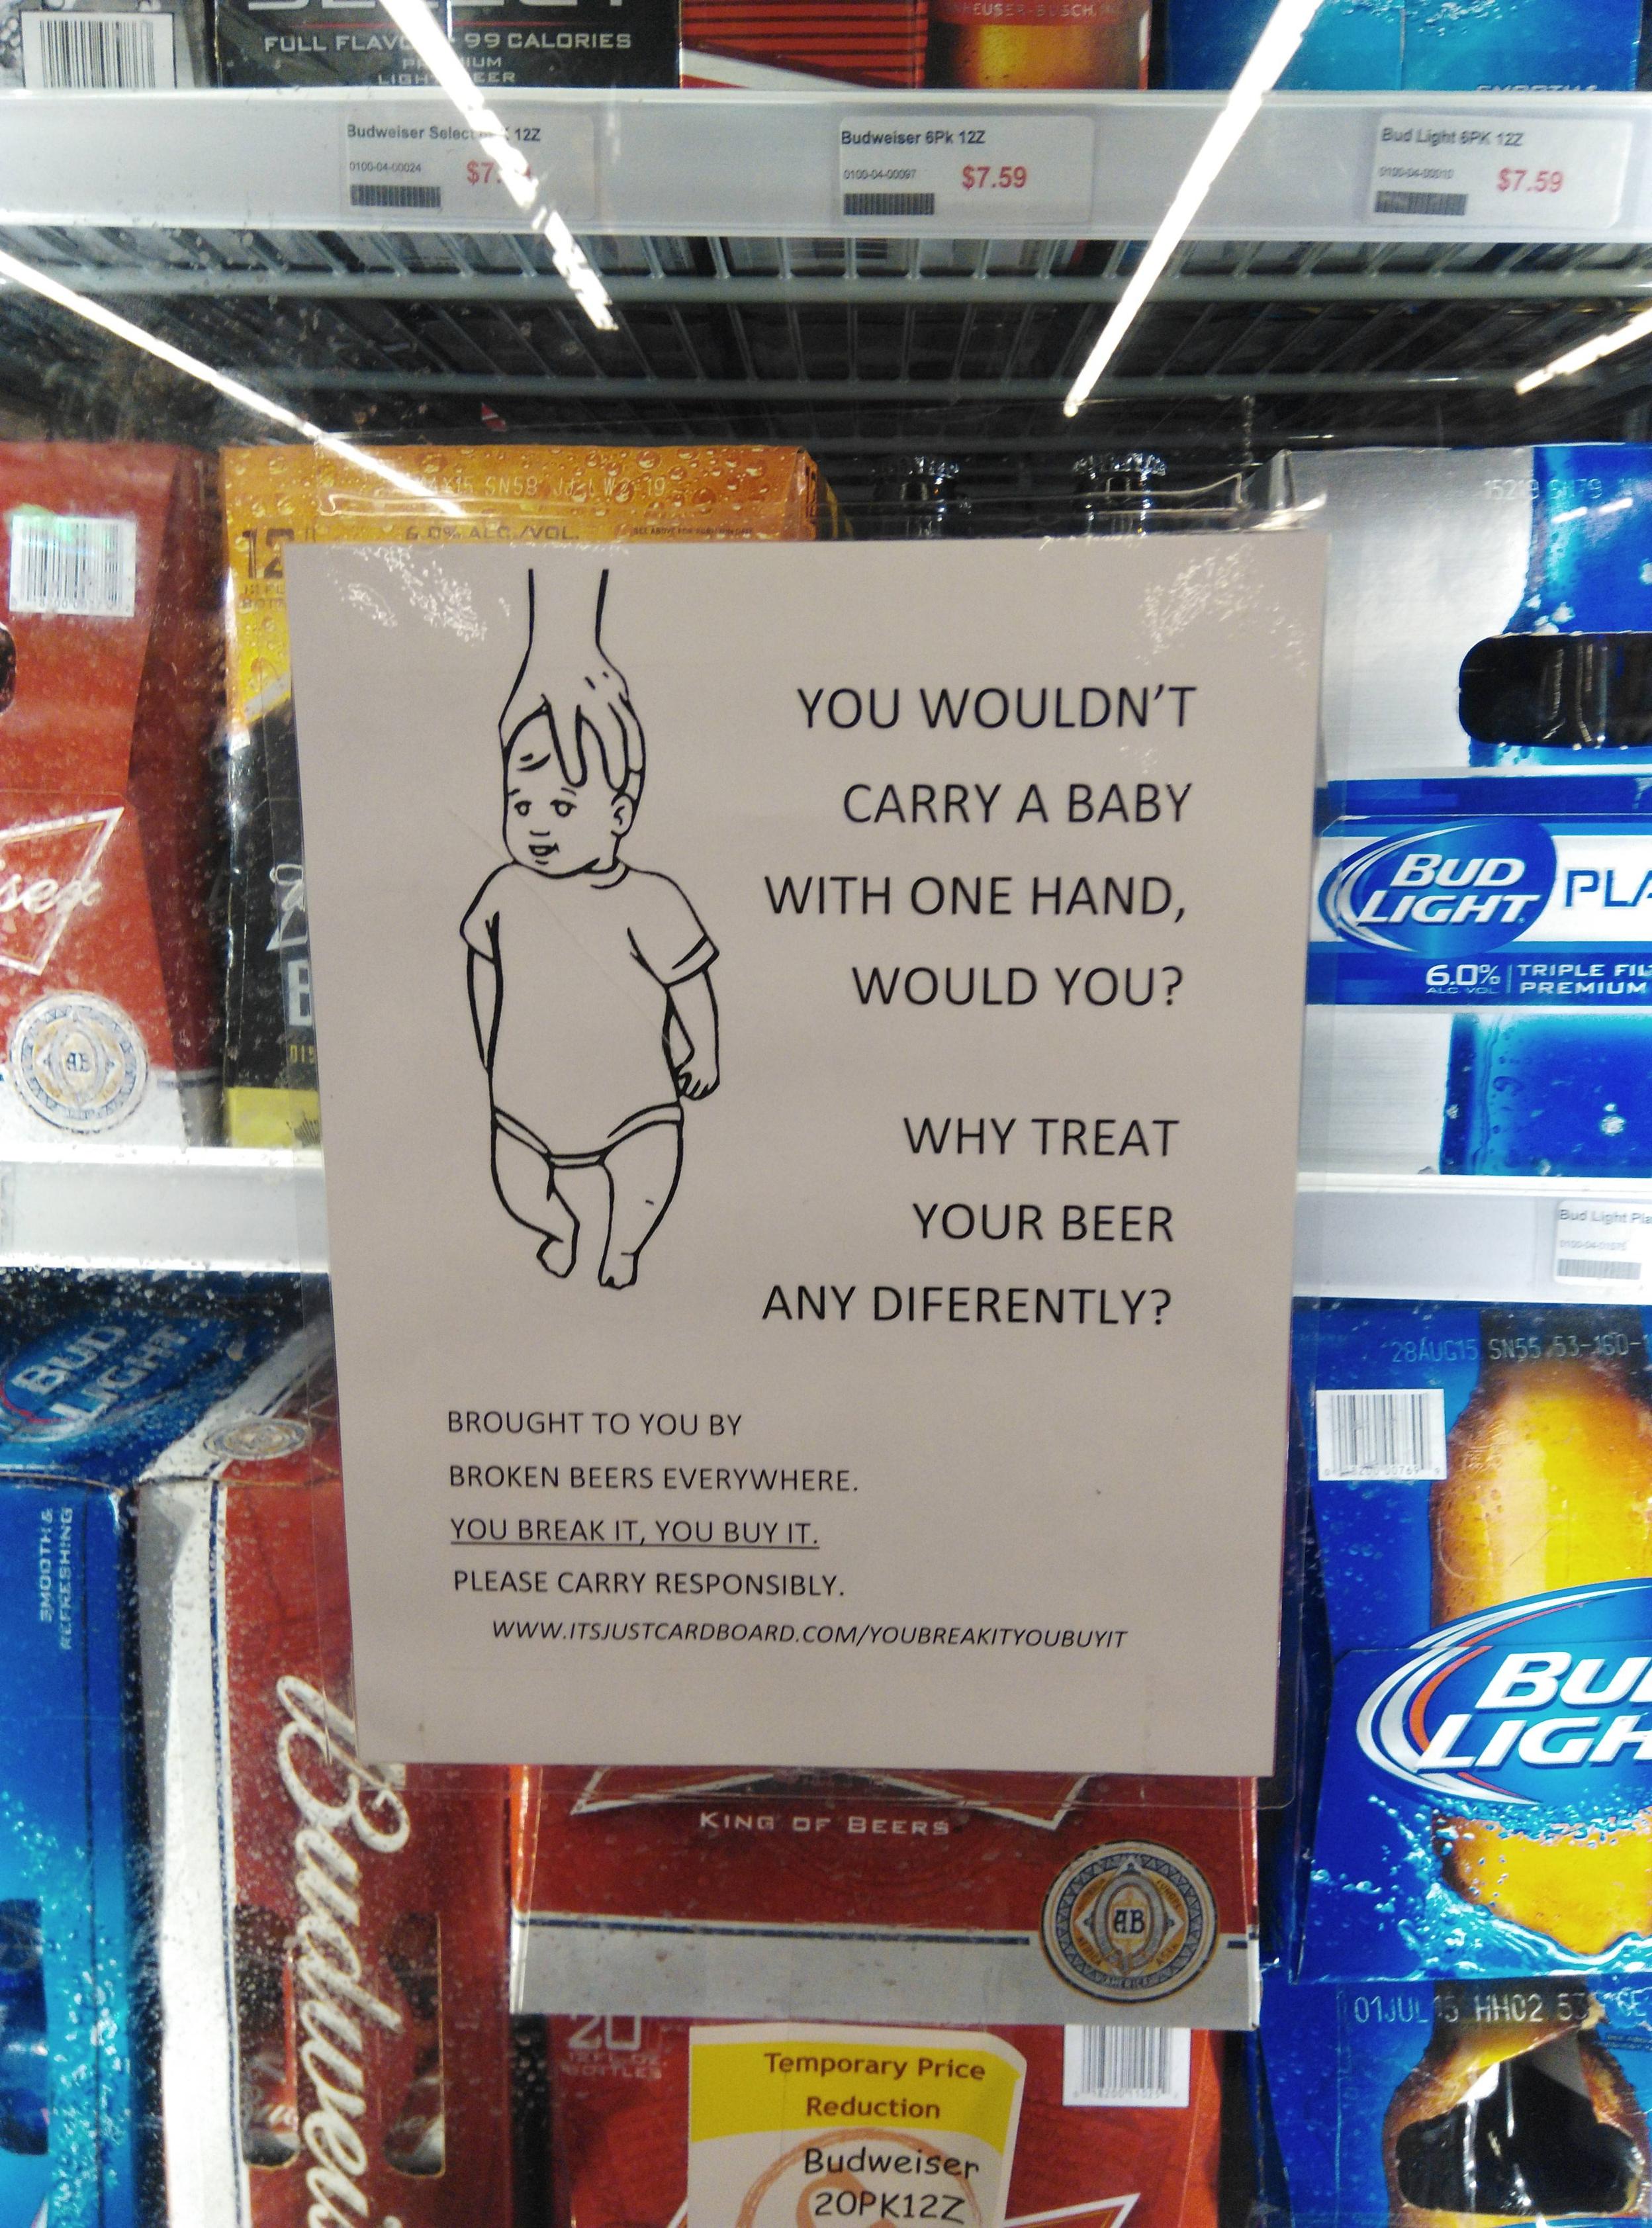 funny liquor store - You Wouldn'T Carry A Baby With One Hand, Would You? Gosp. Why Treat Your Beer Any Diferently? Brought To You By Mrcikin Beers Everywhere Wou Seakil You Buyit Please Carry Responsibly www. D.Comtoimialogo my Budweiser 20PK122